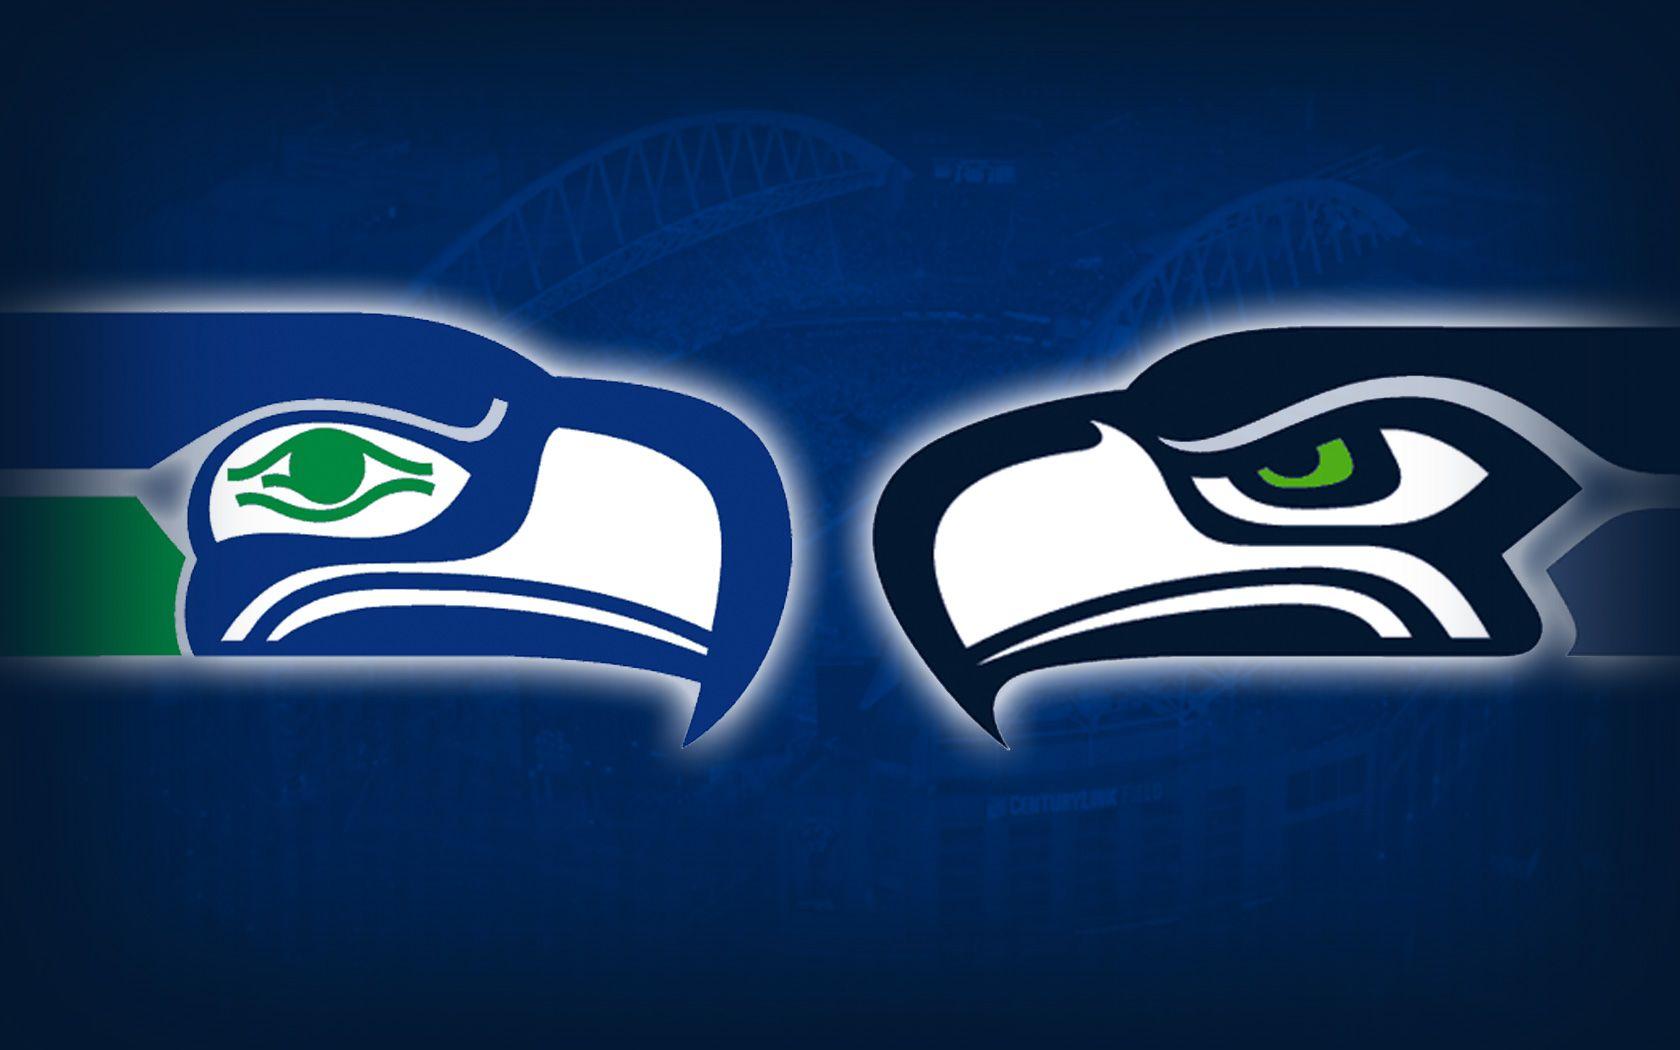 Marvellous Seahawks Wallpapers 1680x1050PX ~ Seahawk Wallpapers